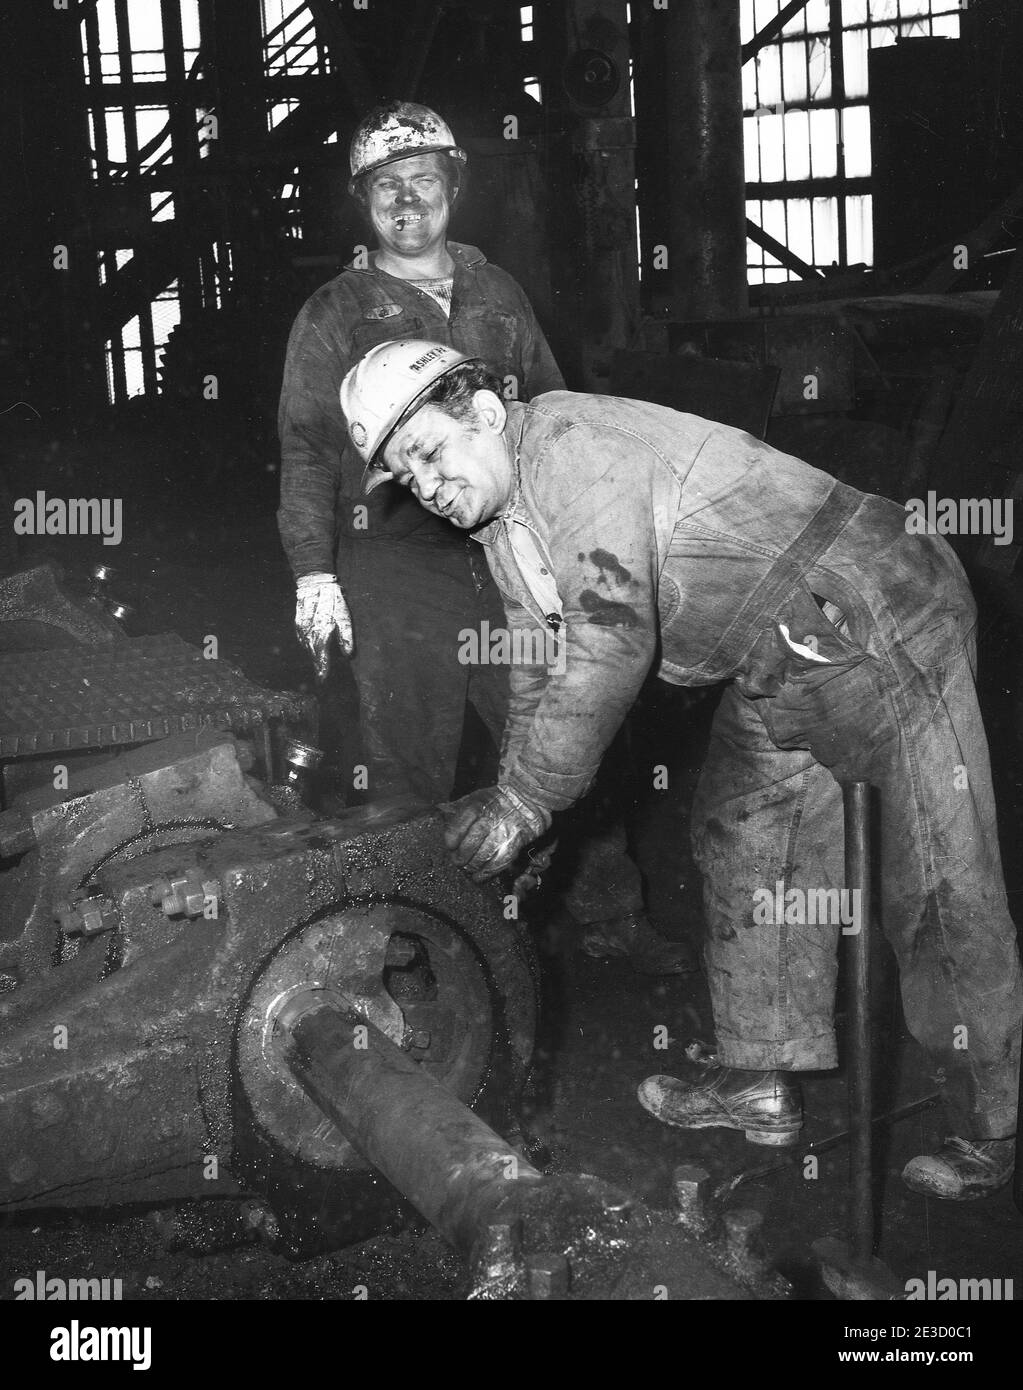 Two Laborers working in the Blue Coal's Huber Breaker. The Huber was a landmark located in the borough of Ashley, Hanover Township, Luzerne County, Pennsylvania, USA. The breaker was built in 1939 to replace the Maxwell Breaker which was located at the colliery. Run-of-mine coal arriving at the breaker was washed and cleaned to remove impurities, principally slate. It was crushed and screened to specific sizes desired by customers. Considered an ultra-modern plant when constructed. It processed 7,000 tons of Anthracite coal per day.The final product was sprayed with a blue dye and sold as “Blu Stock Photo